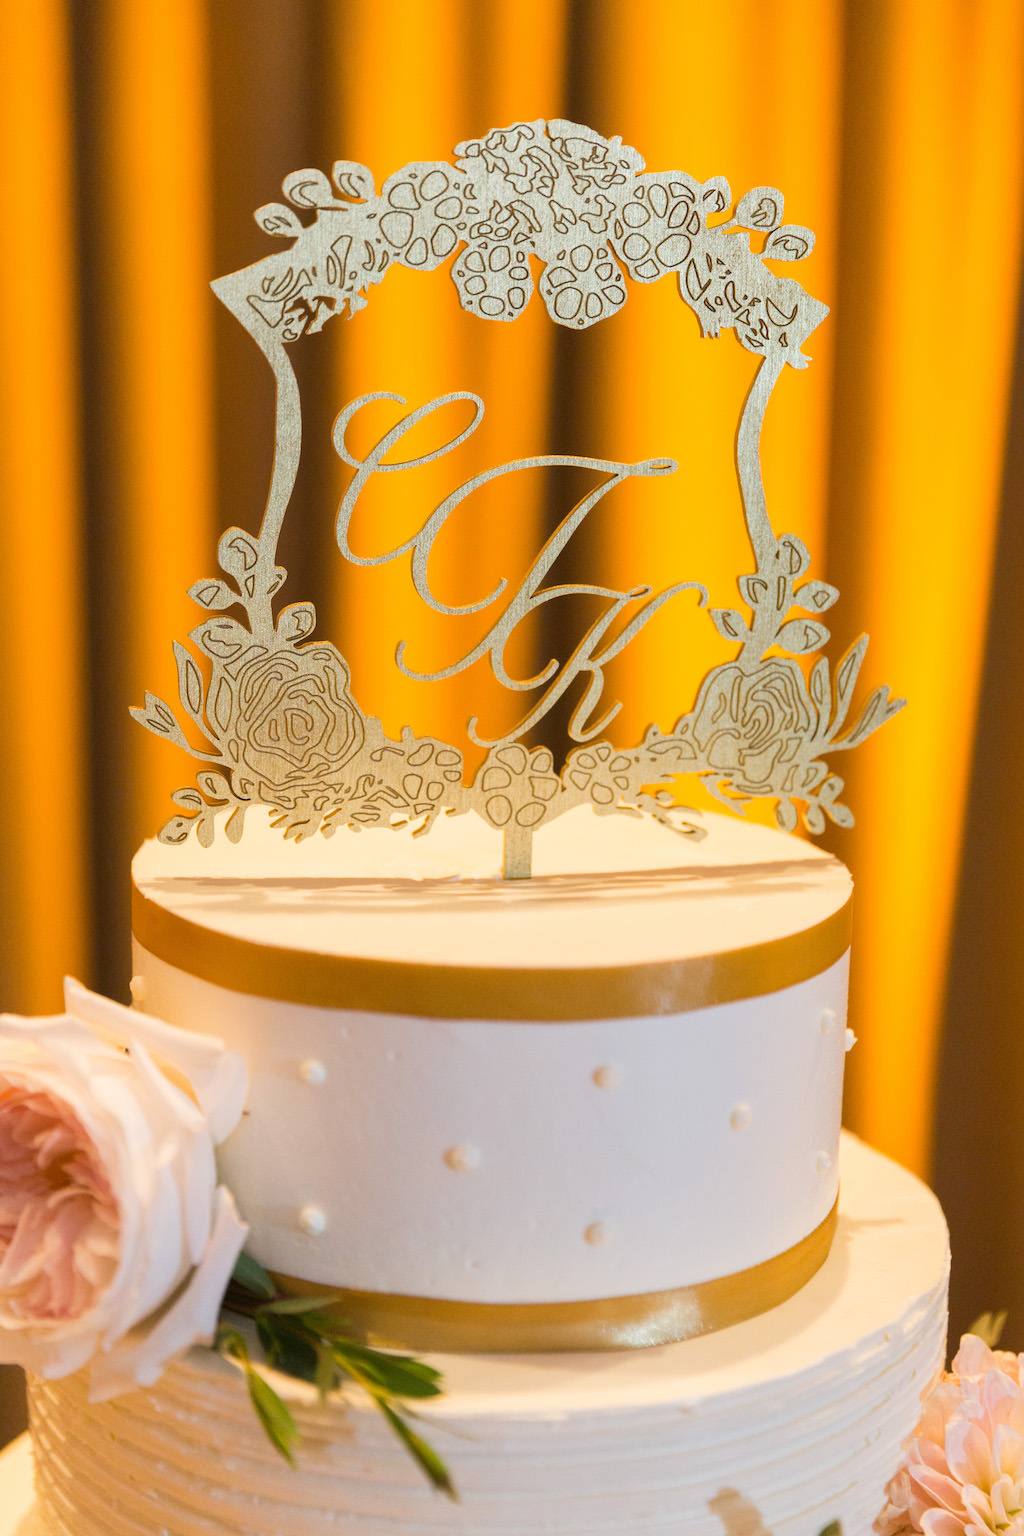 Round White with Gold Ribbon Stripes Wedding Cake with Ornate Custom Monogram Floral Framed Cake Topper | St Pete Wedding Stationary and Monograms A and P Designs | Historic Hotel Wedding Venue, Caterer, and Cake Vinoy Renaissance